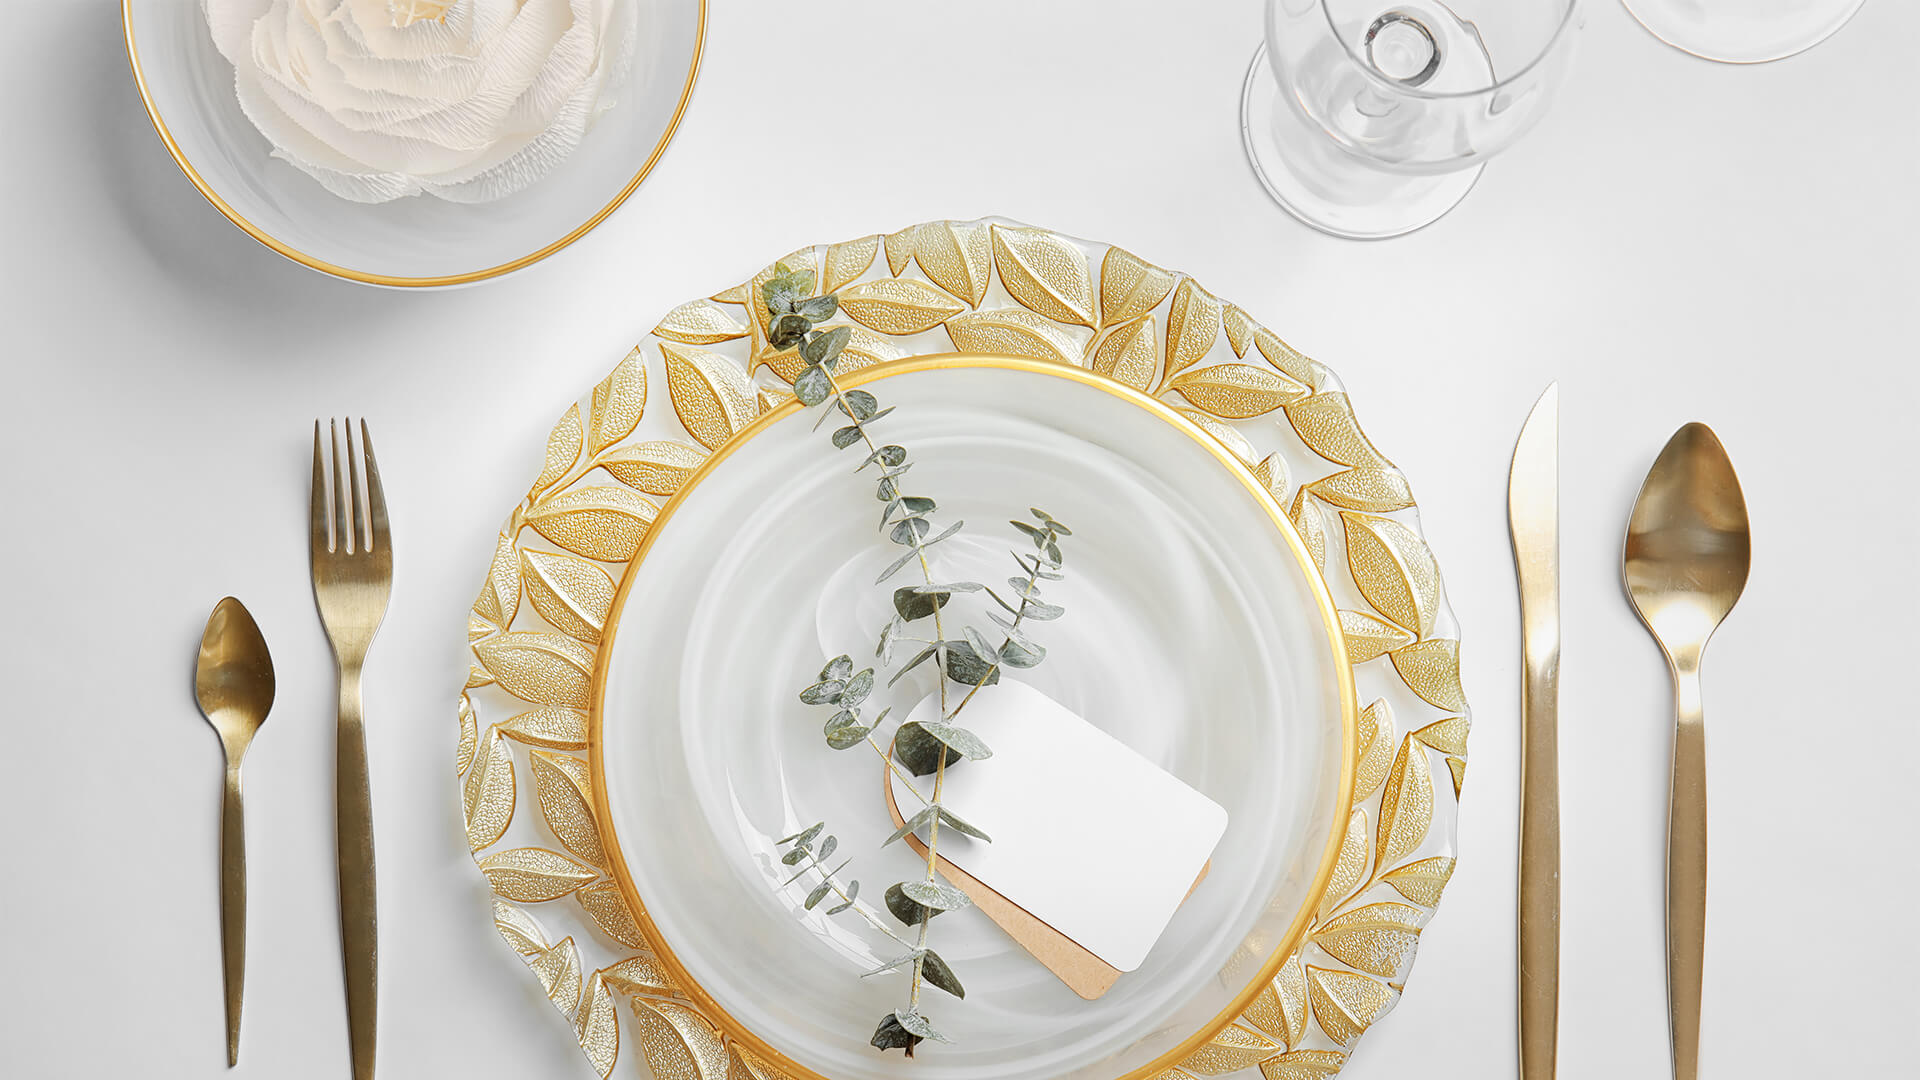 Luxury table setting with gold cutlery and white plates